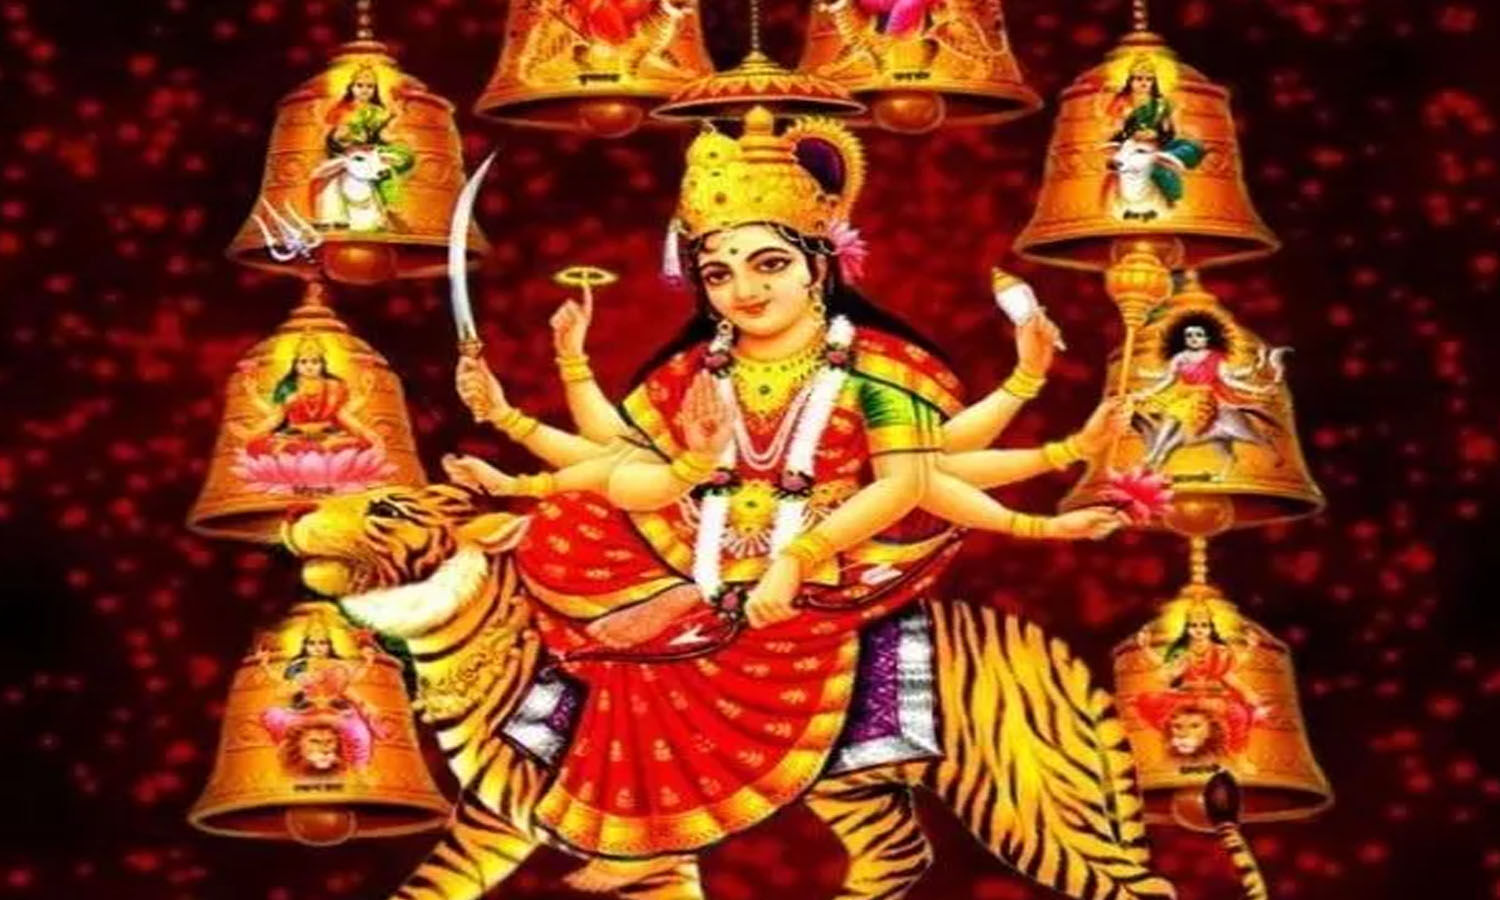 Navratri 2022 Vrat: Keep yourself healthy during Navratri fasting, these tips are helpful in reducing weight